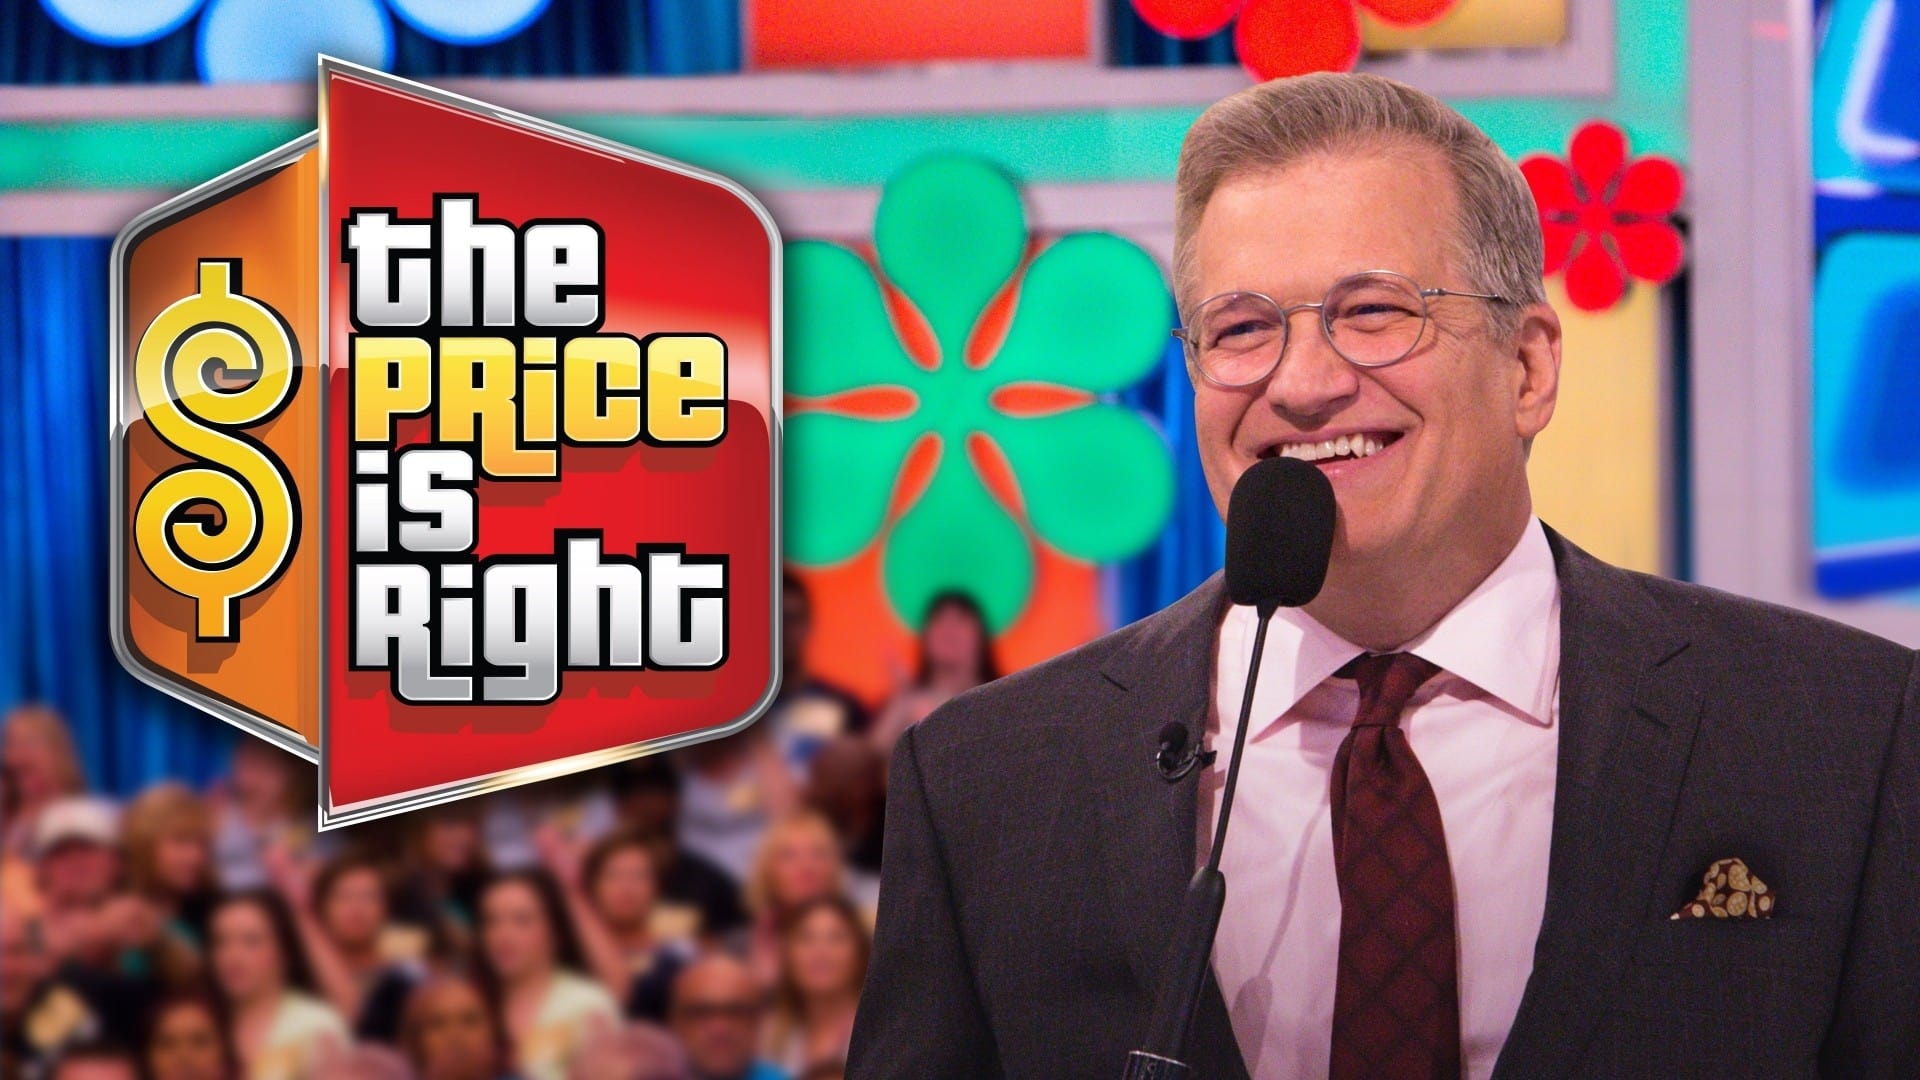 The Price Is Right - Season 6 Episode 80 : The Price Is Right Season 6 Episode 80